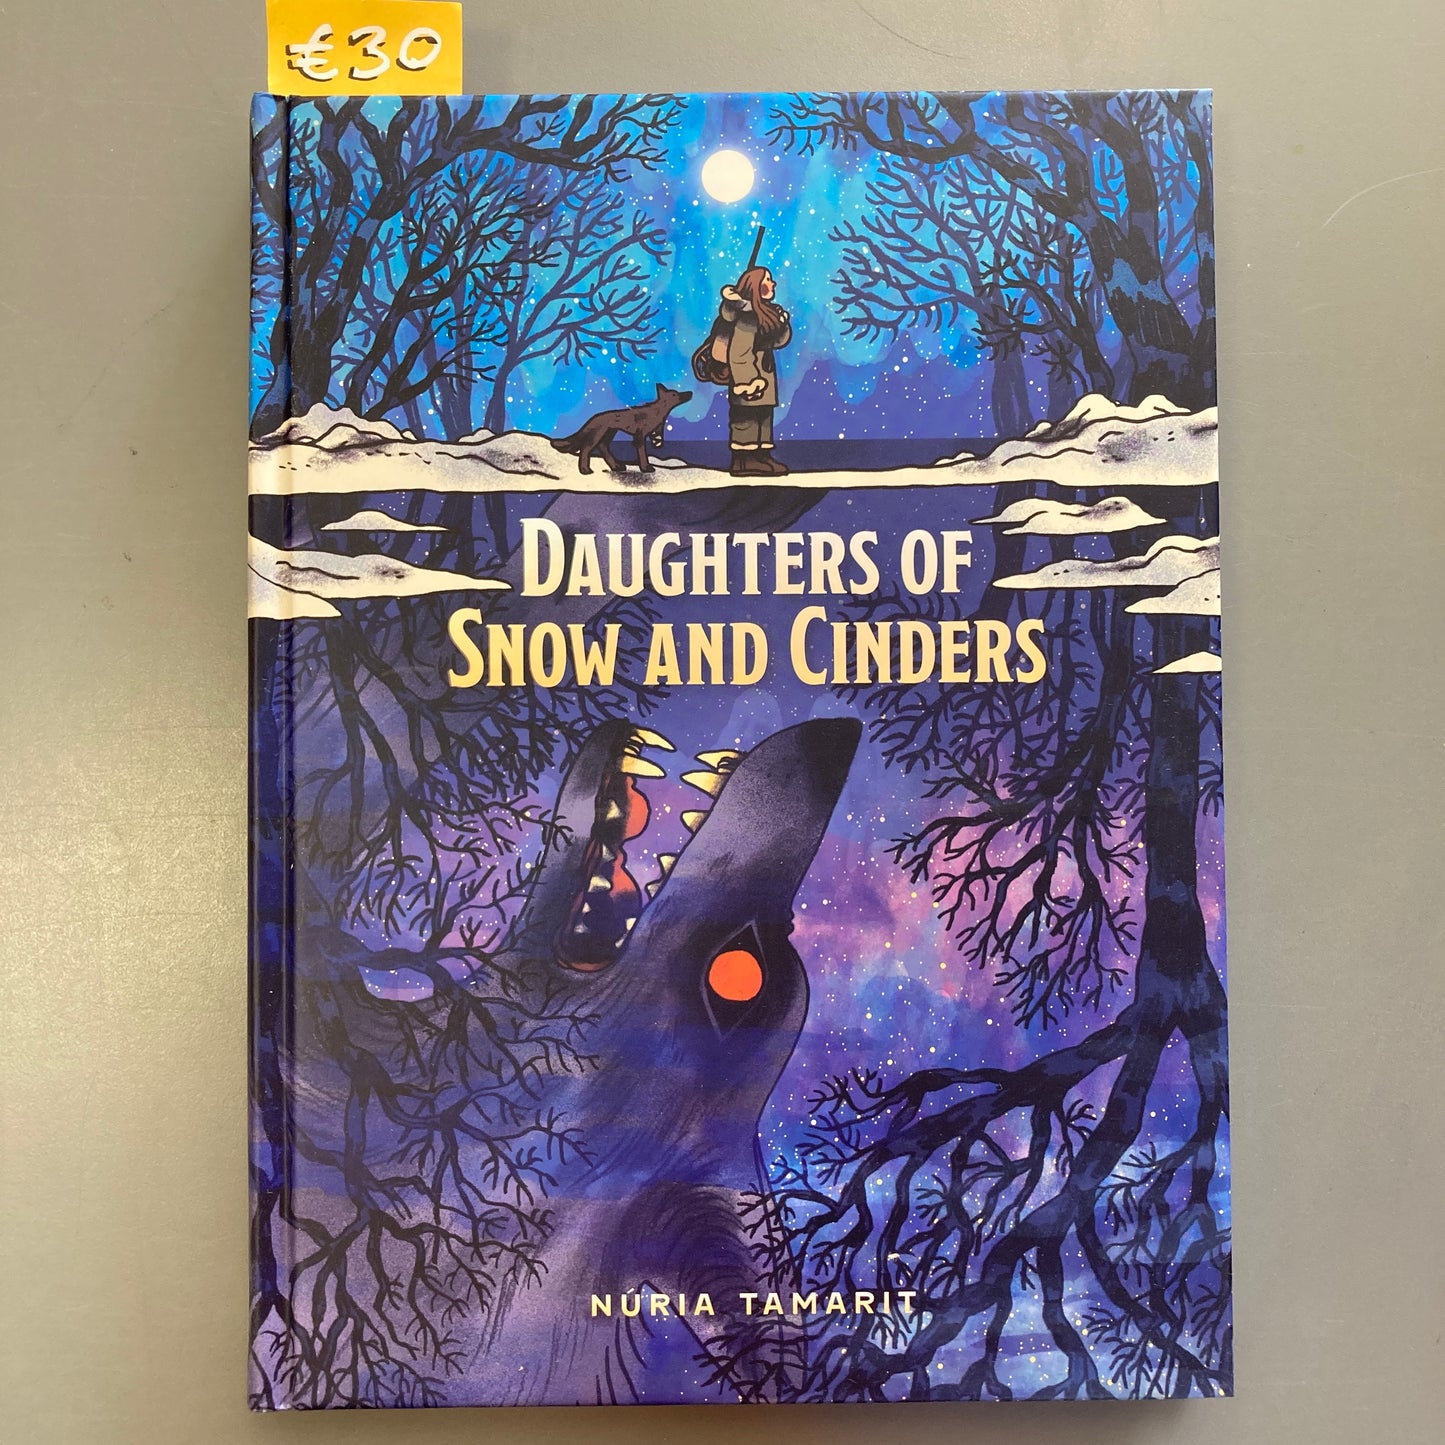 Daughters of Snow and Cinders